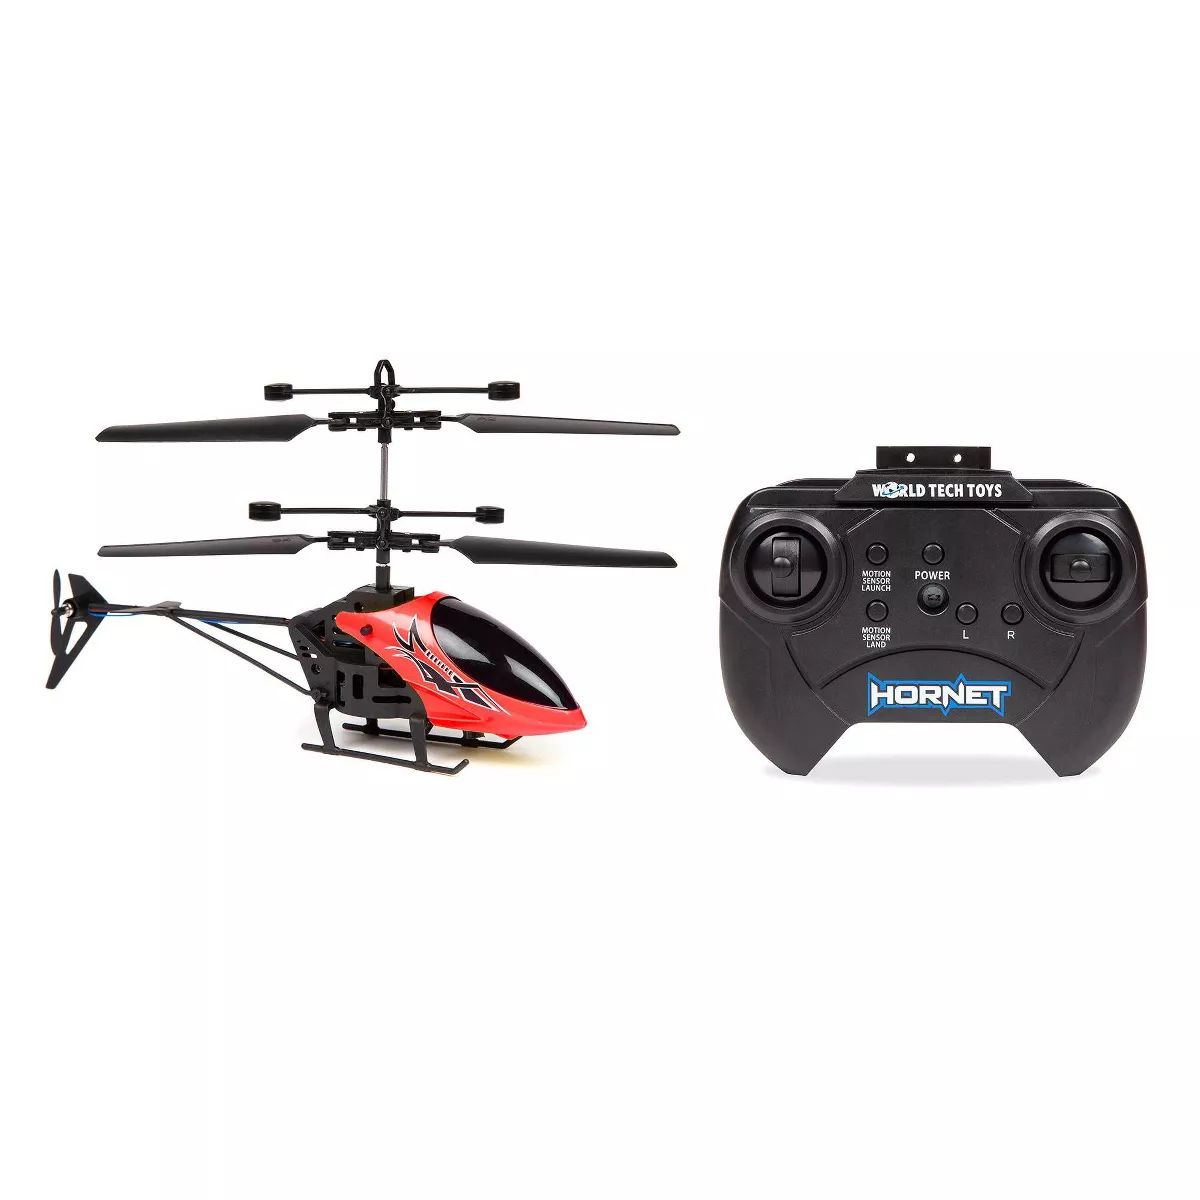 World Tech Toys Hornet 2CH IR Helicopter - Red | Target